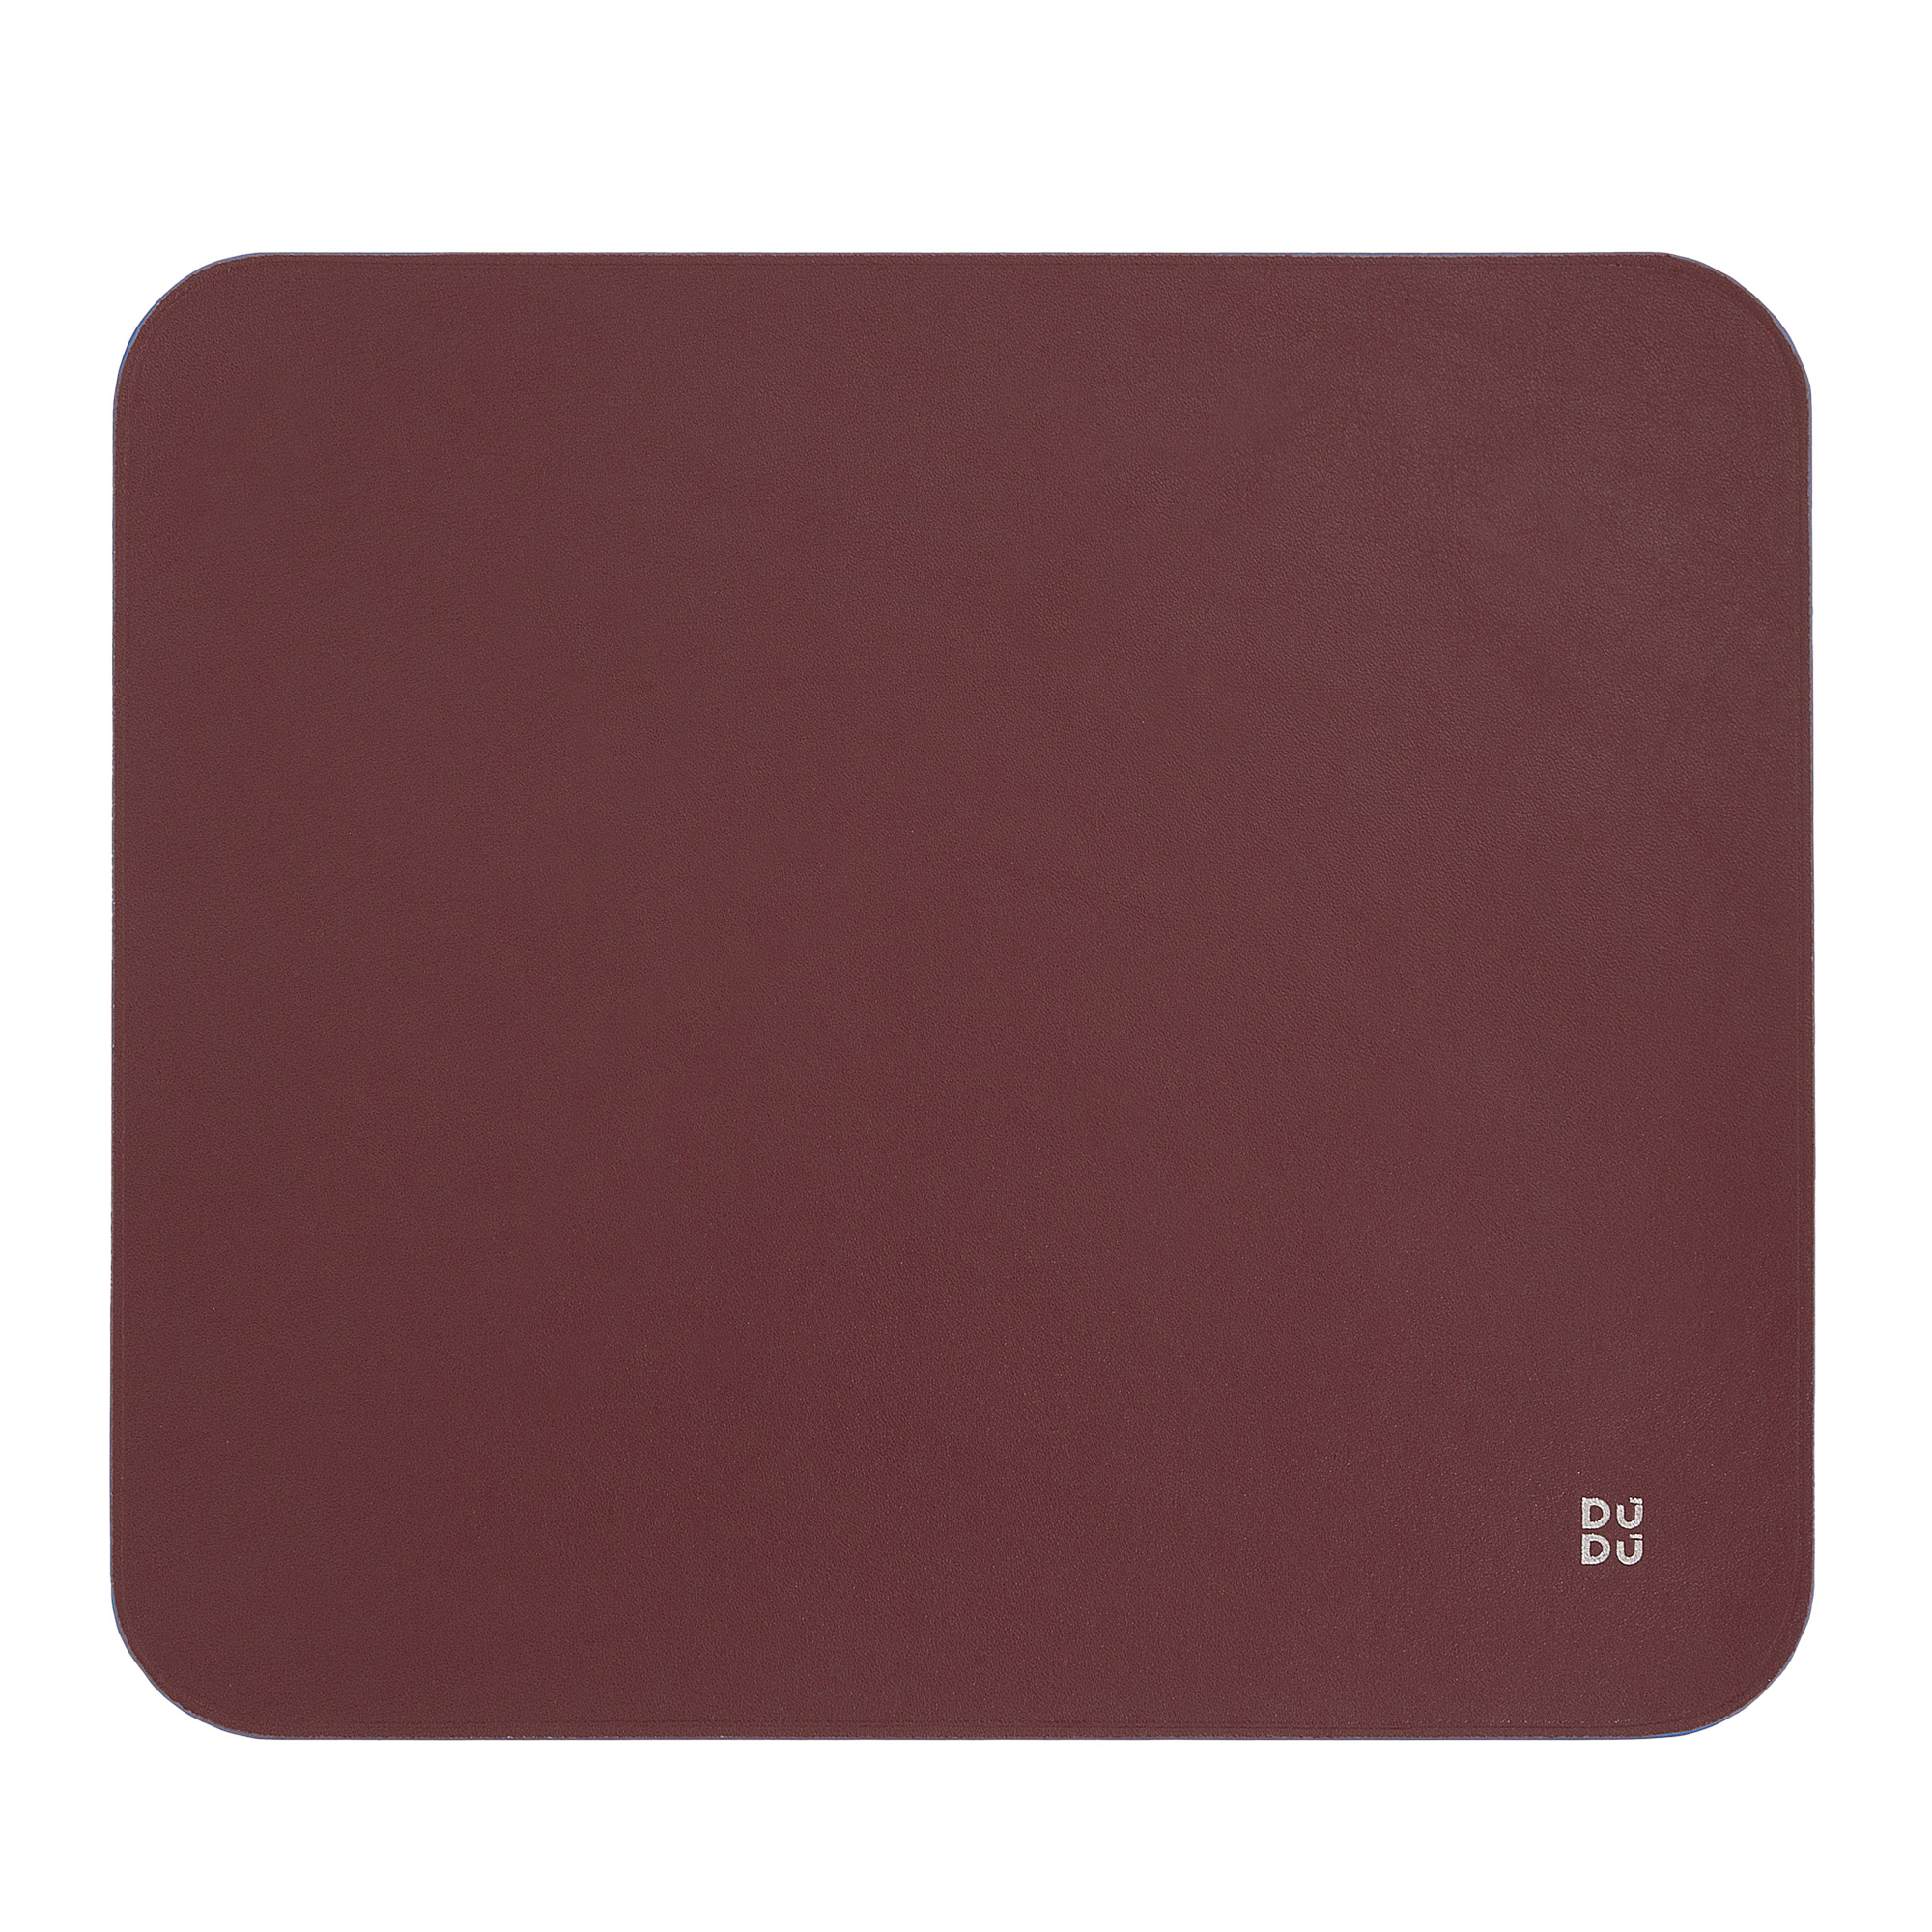 Colorful - Mouse Pad - Burgundy